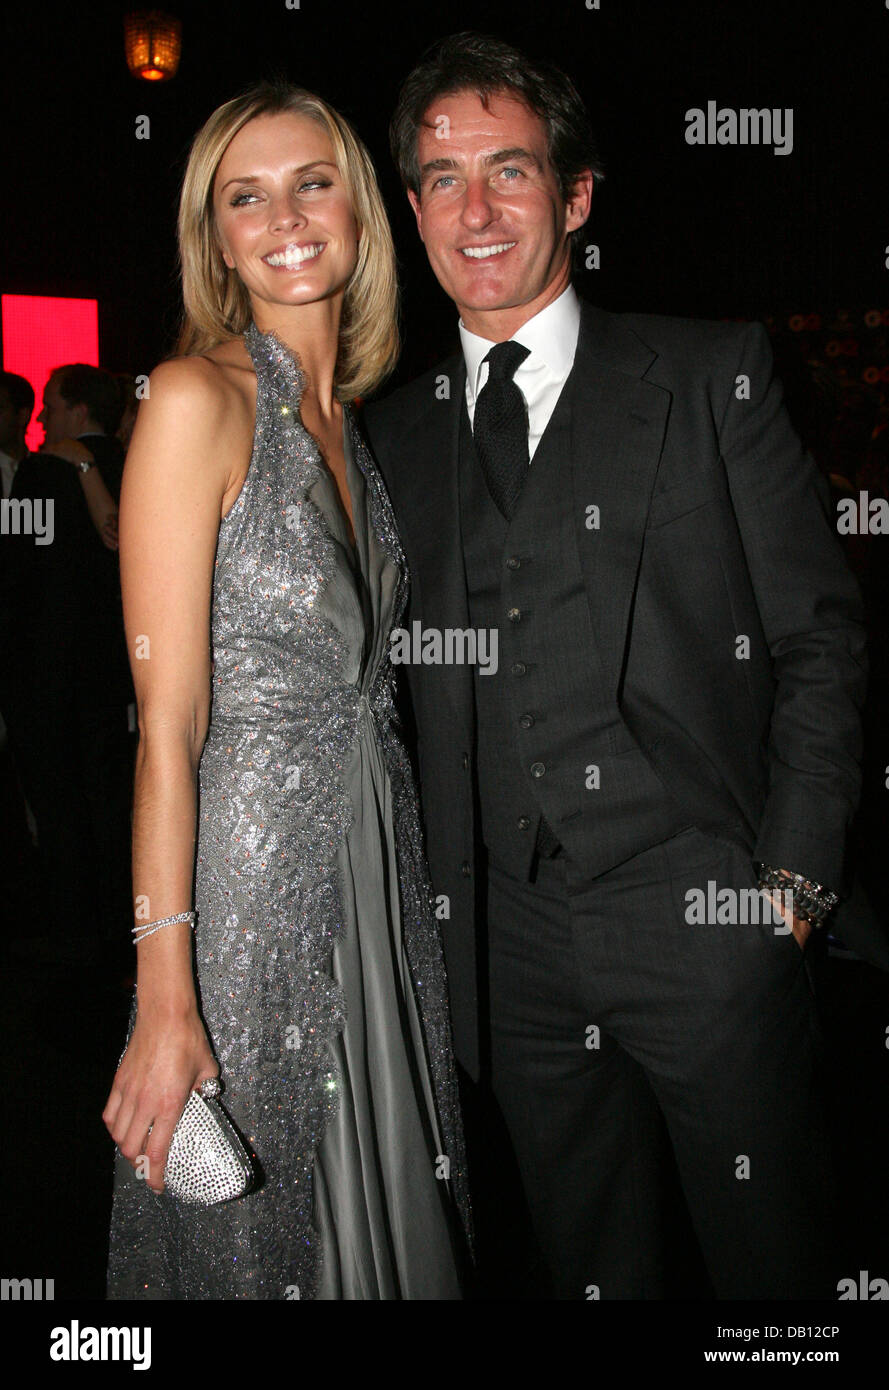 Fortune heir Tim Jefferies and his girlfriend, model Malin Johansson, pose  during the GQ gala event for the presentation of the ?Men of the Year 2007?  prizes in Munich, Germany, 25 October